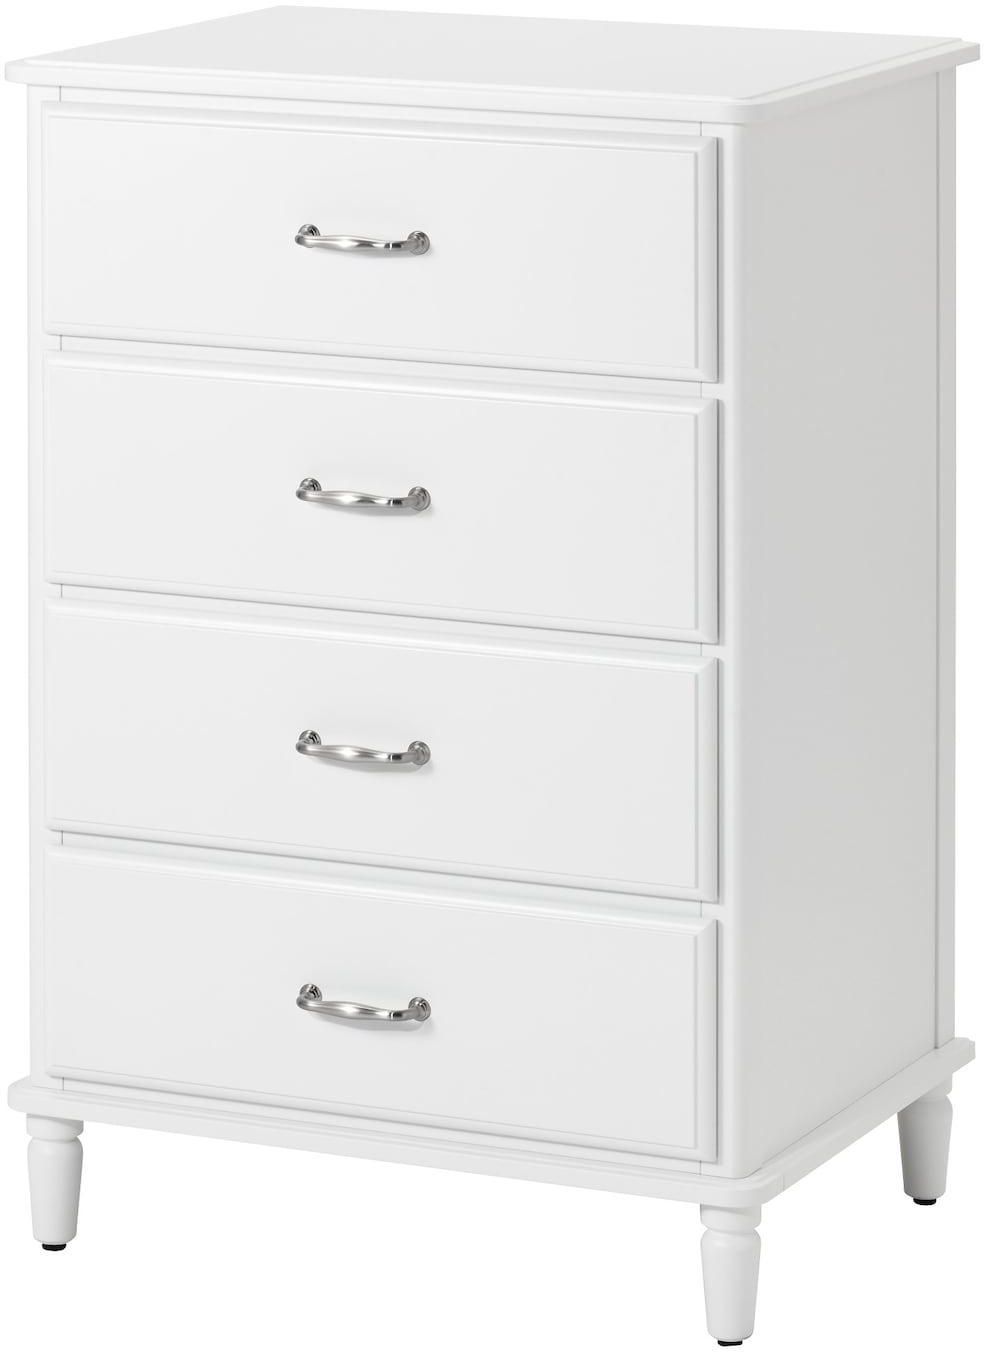 TYSSEDAL Chest of 4 drawers - white 67x102 cm